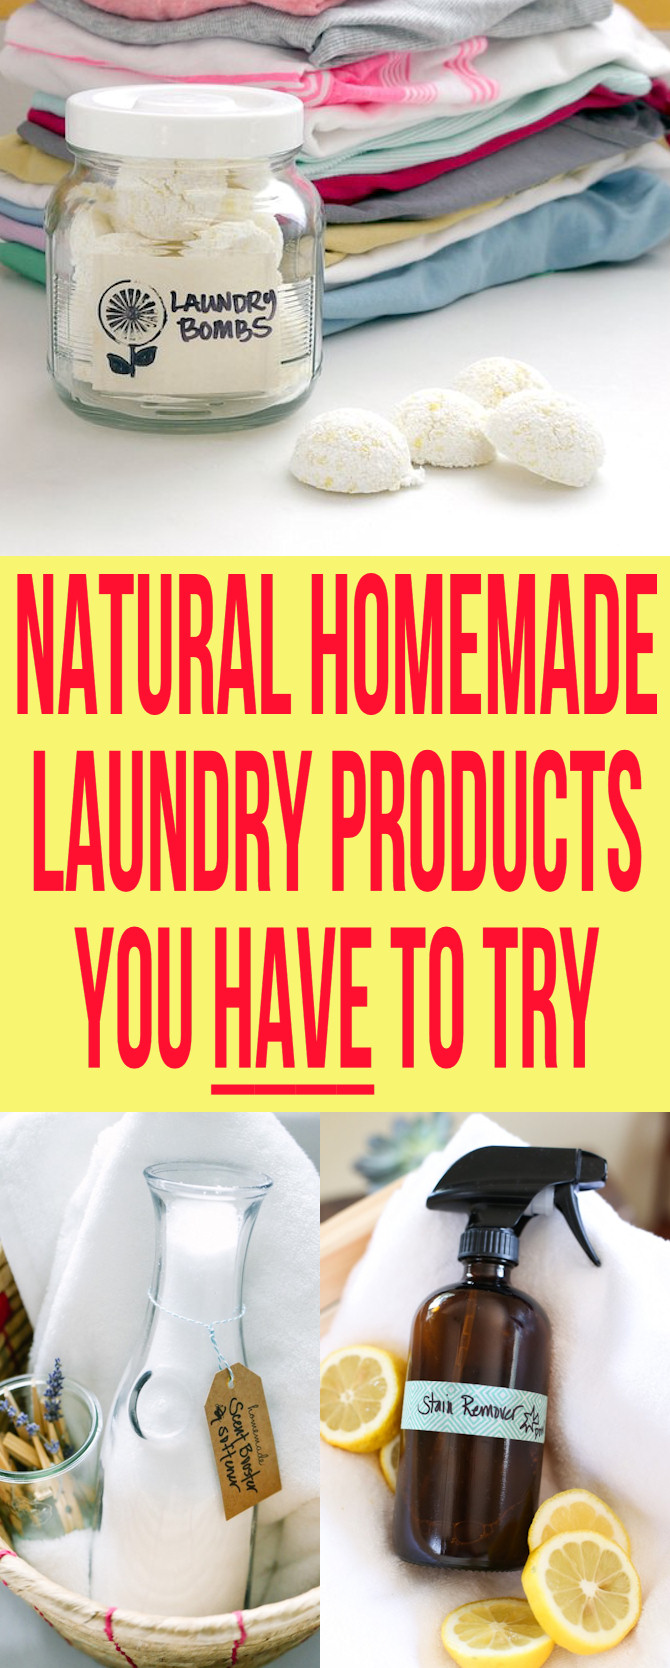 Natural Homemade Laundry Products and Detergents